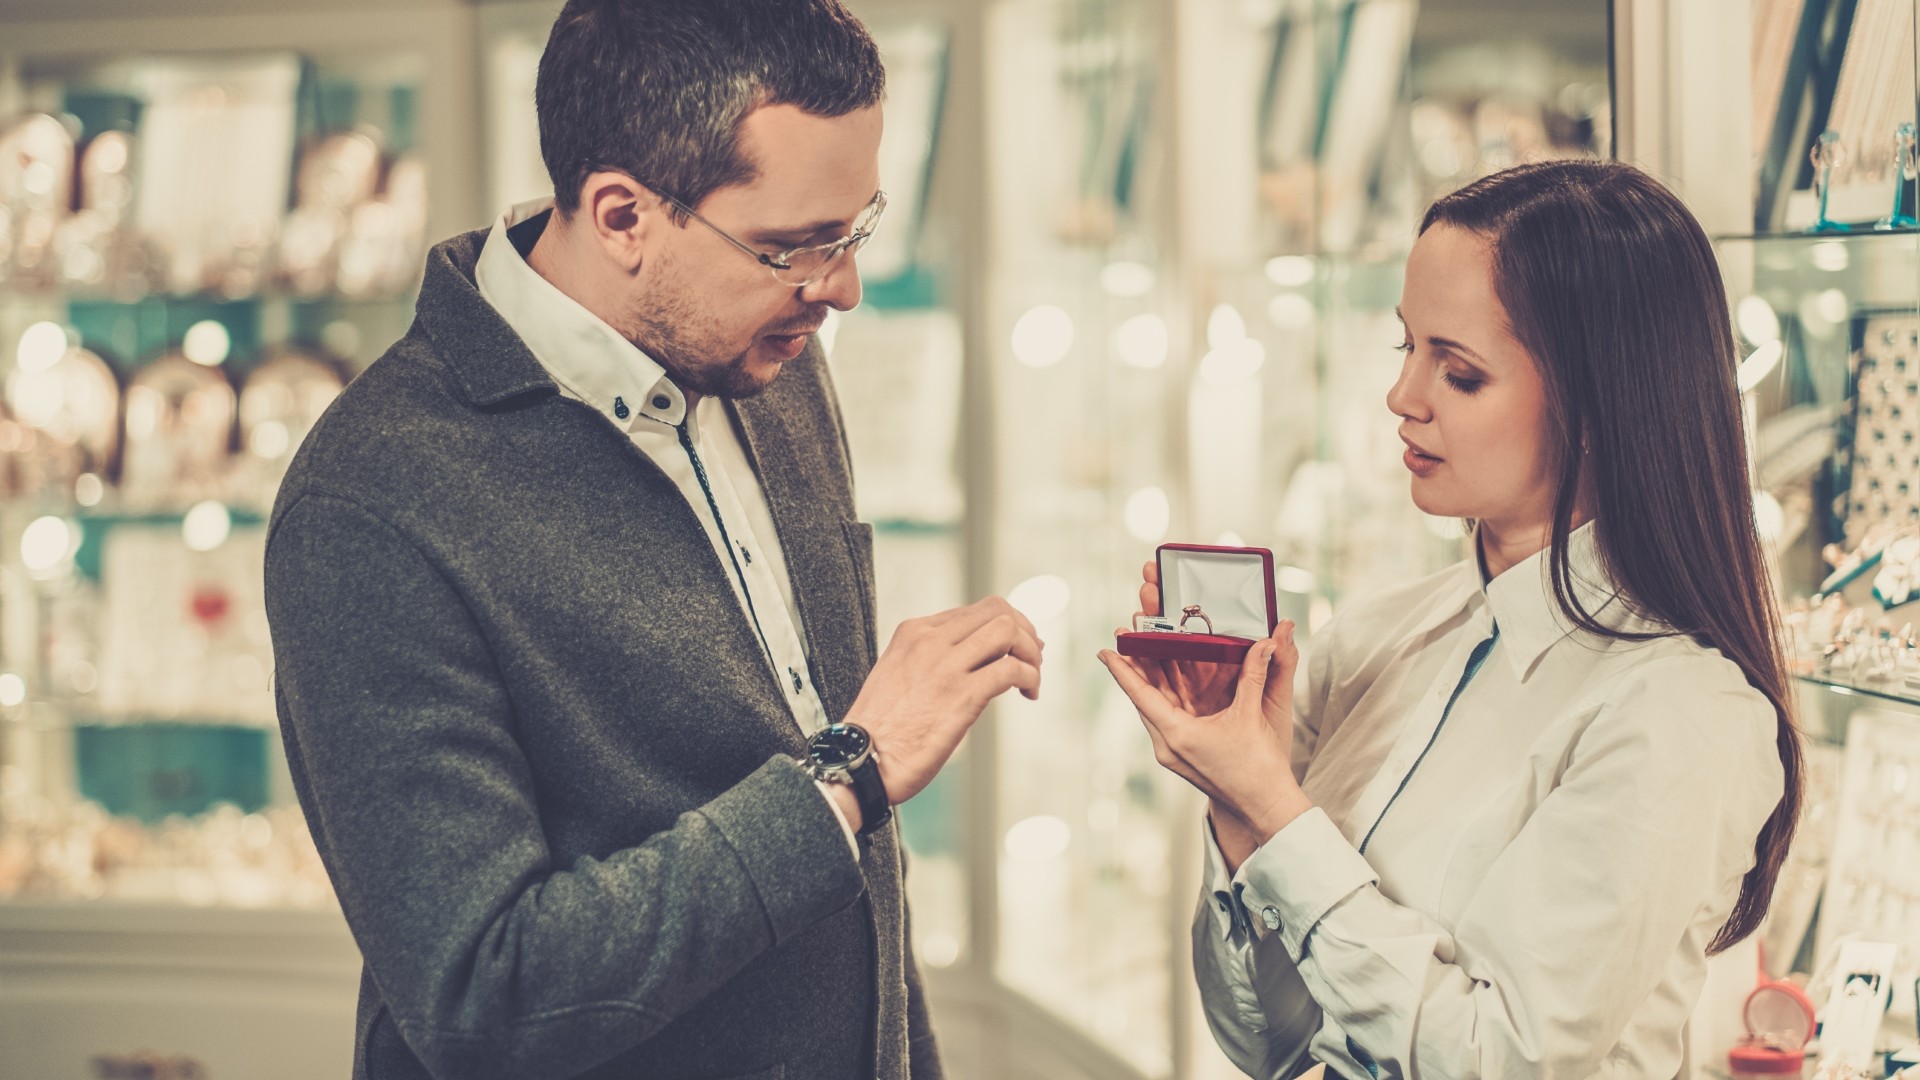 a man shops for an engagement ring with help from an assistant